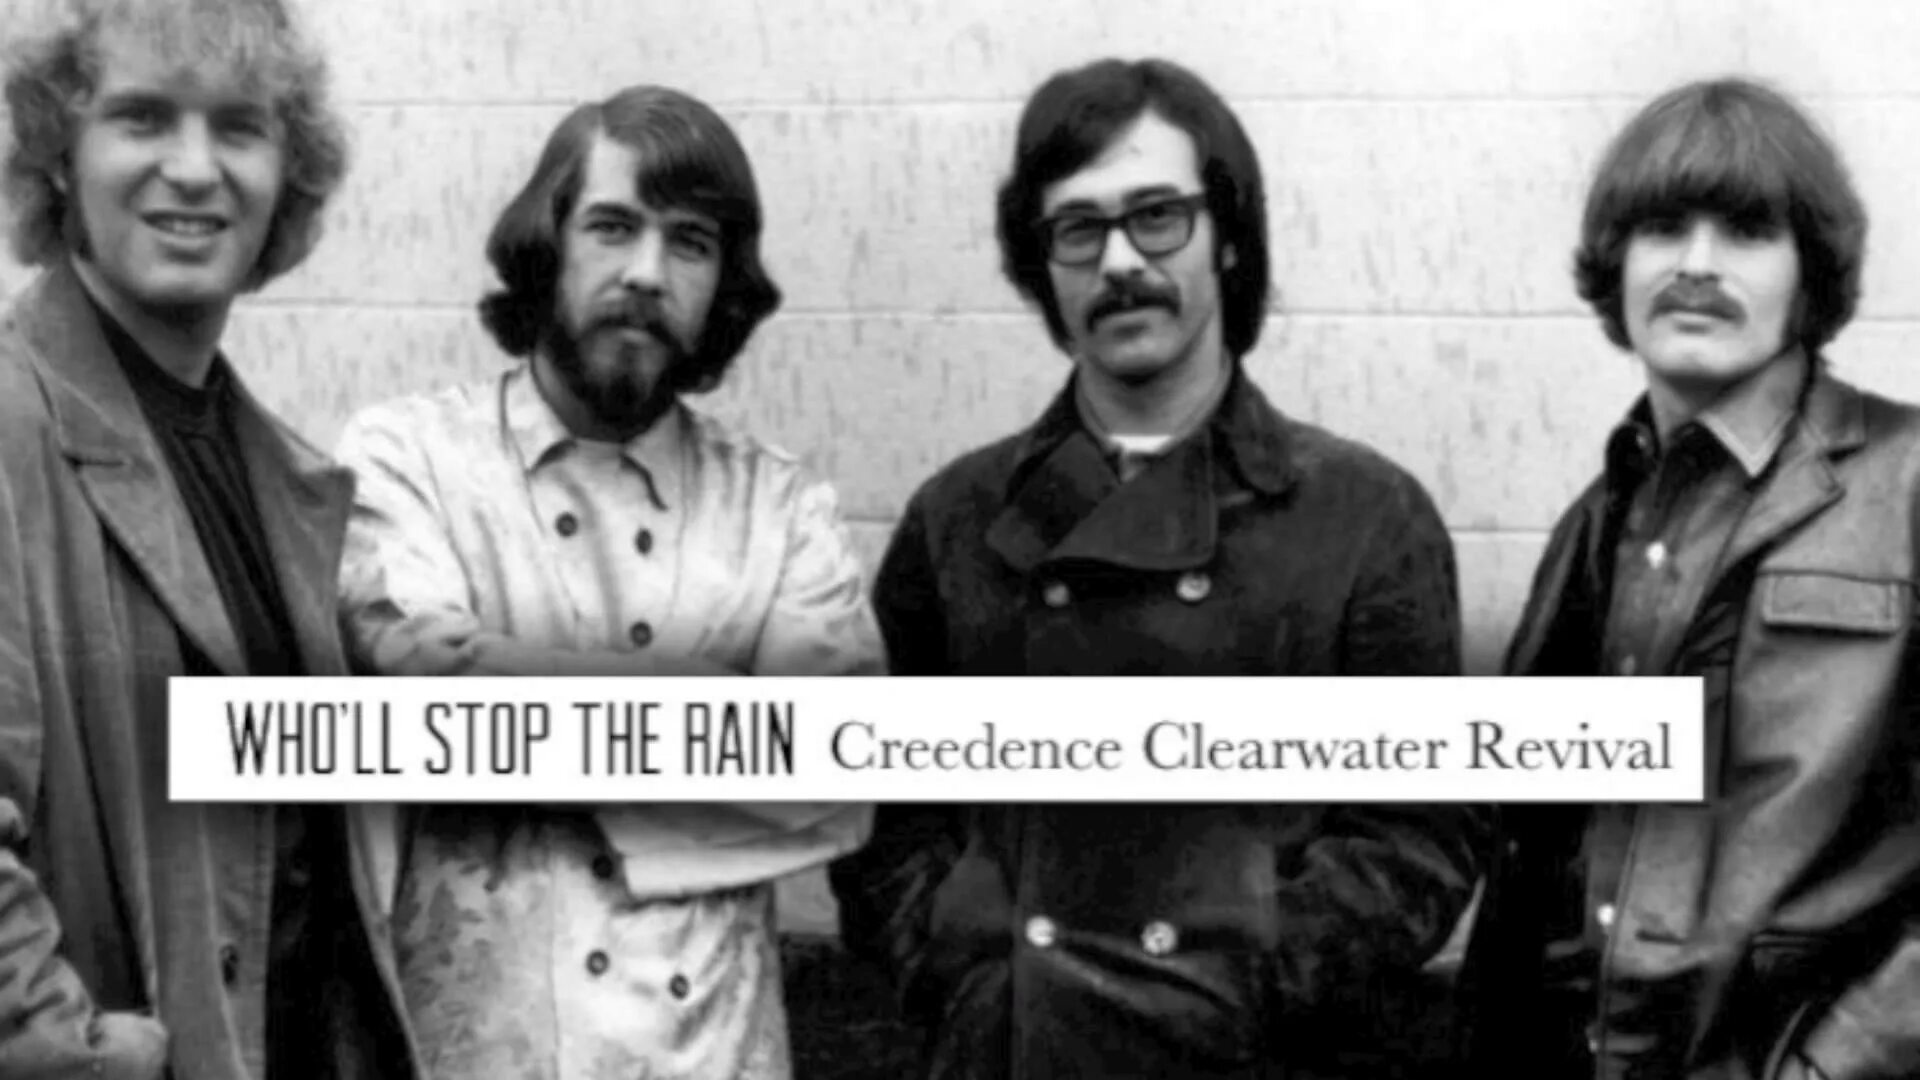 Группа Криденс. Creedence Clearwater Revived 25.02.2020. Криденс Ньюболд. Who stop the Rain Creedence Clearwater Revival. Creedence clearwater rain